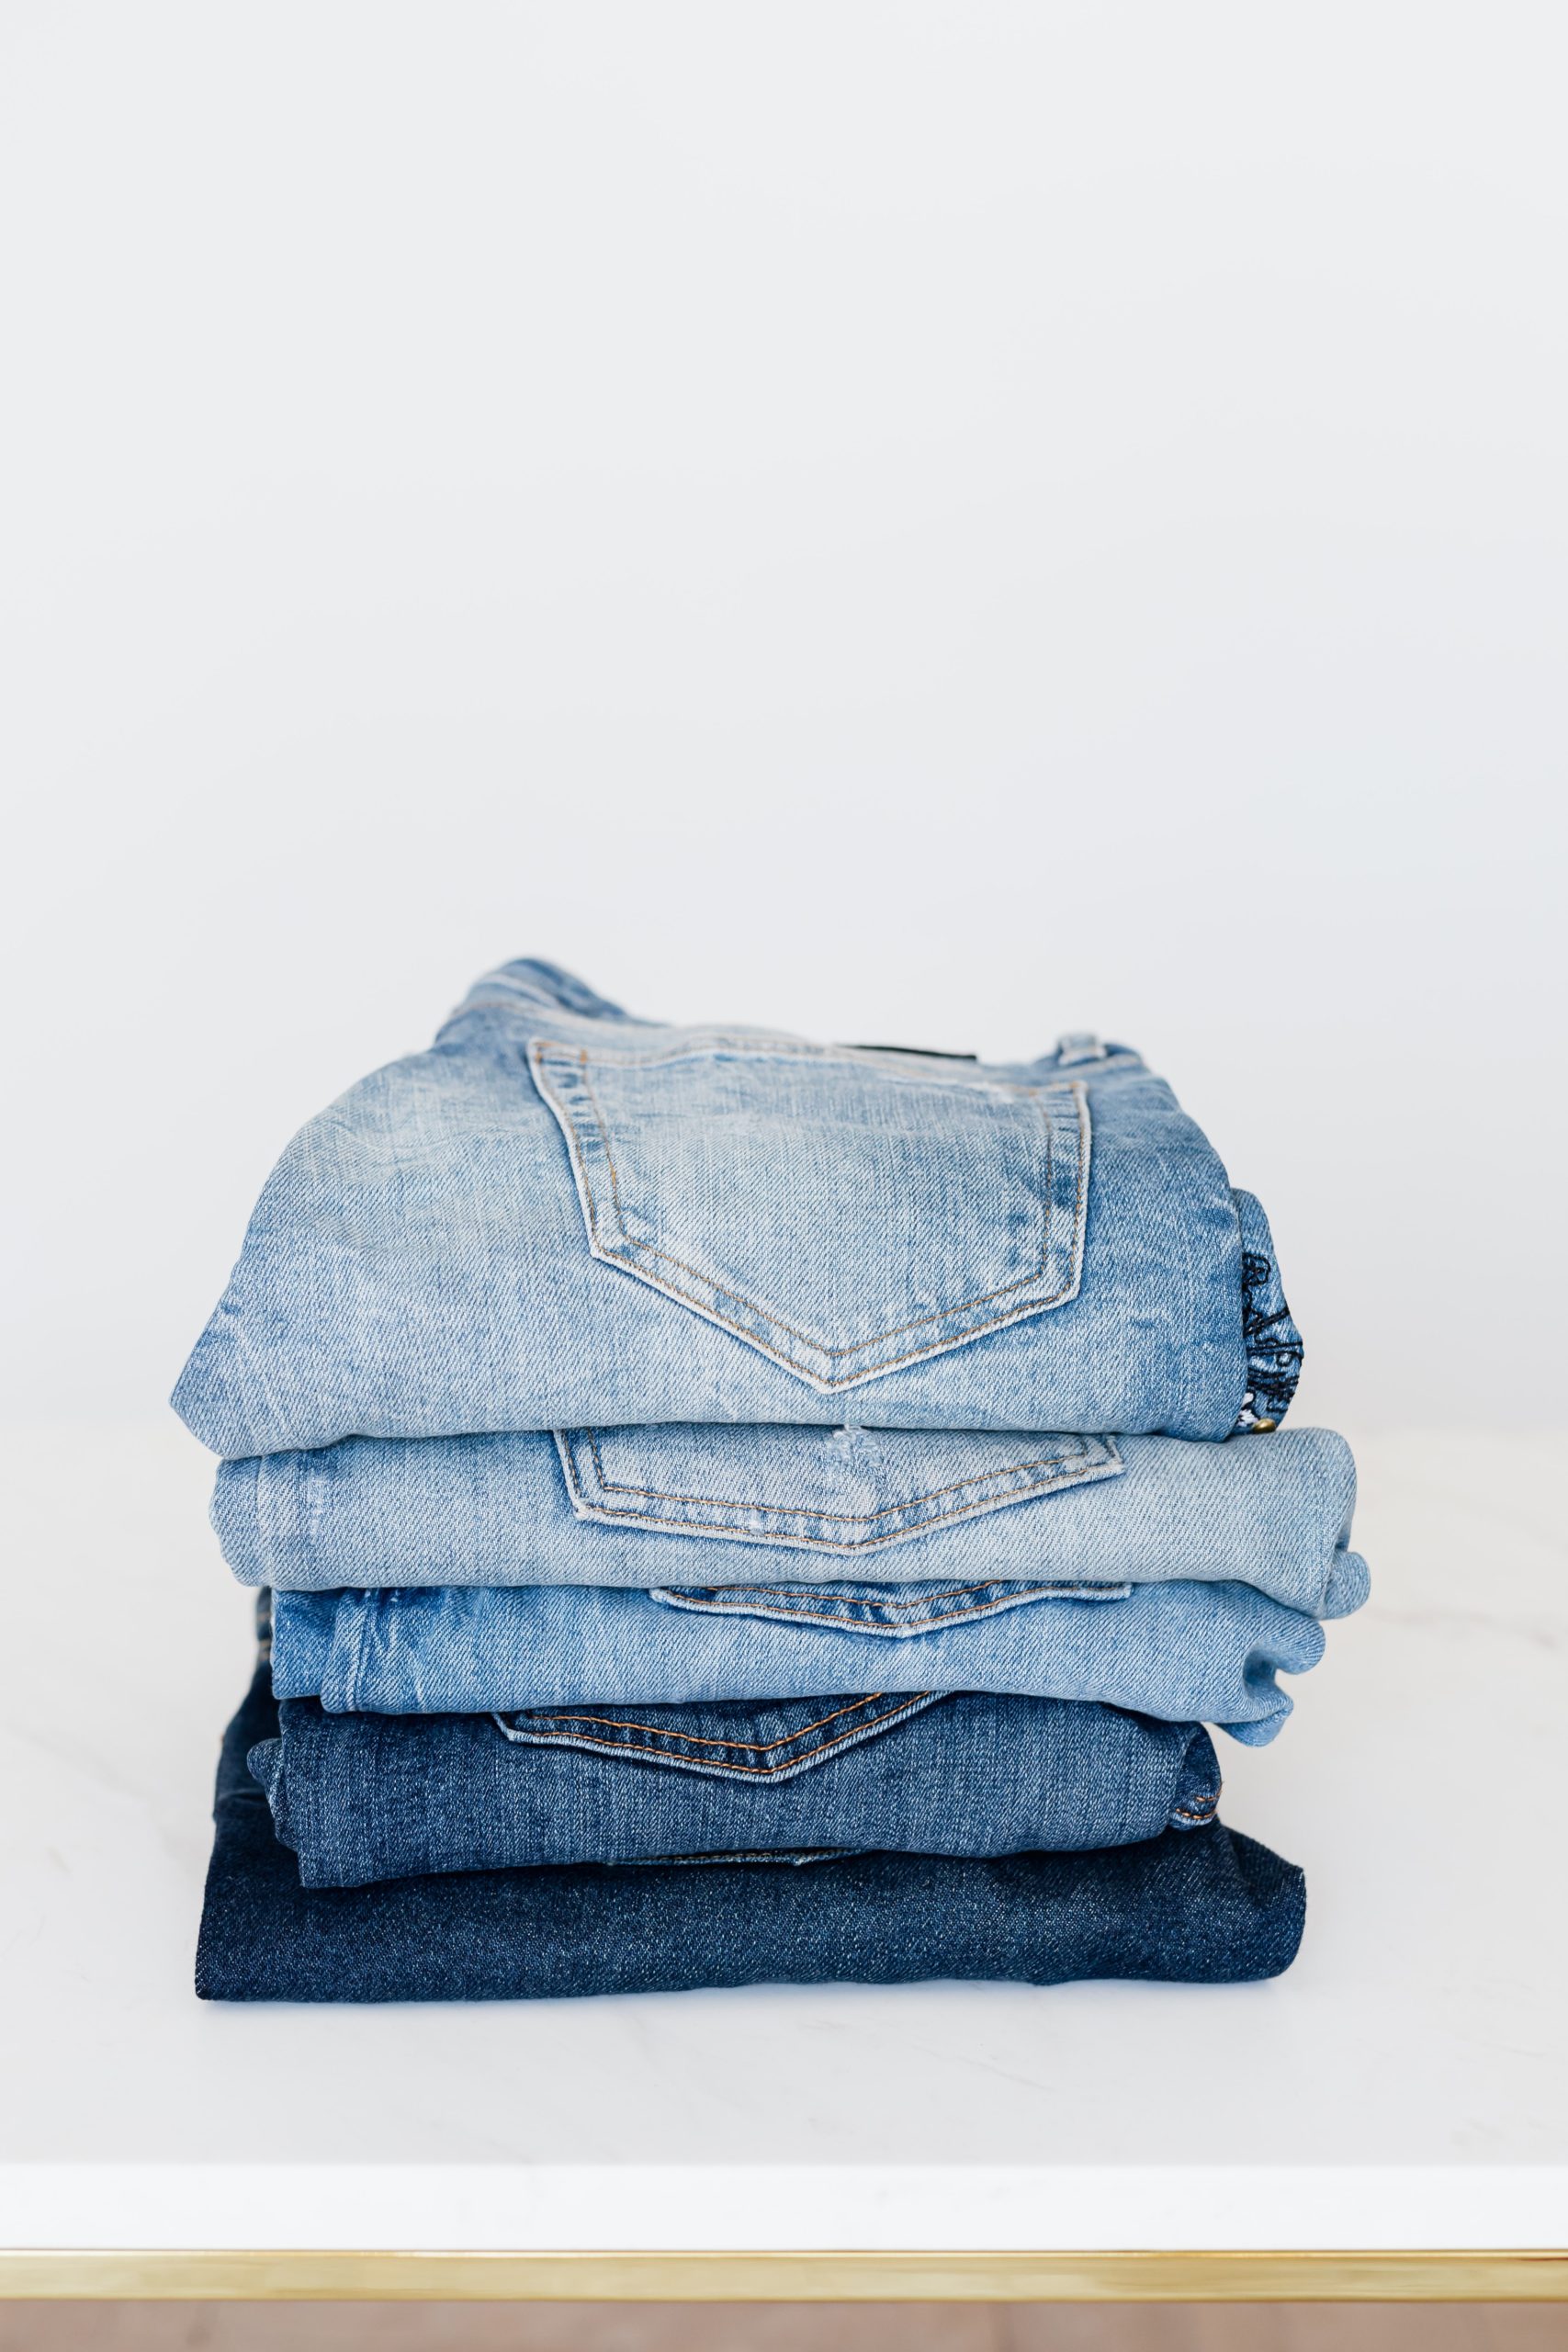 How to Take Care of Denim